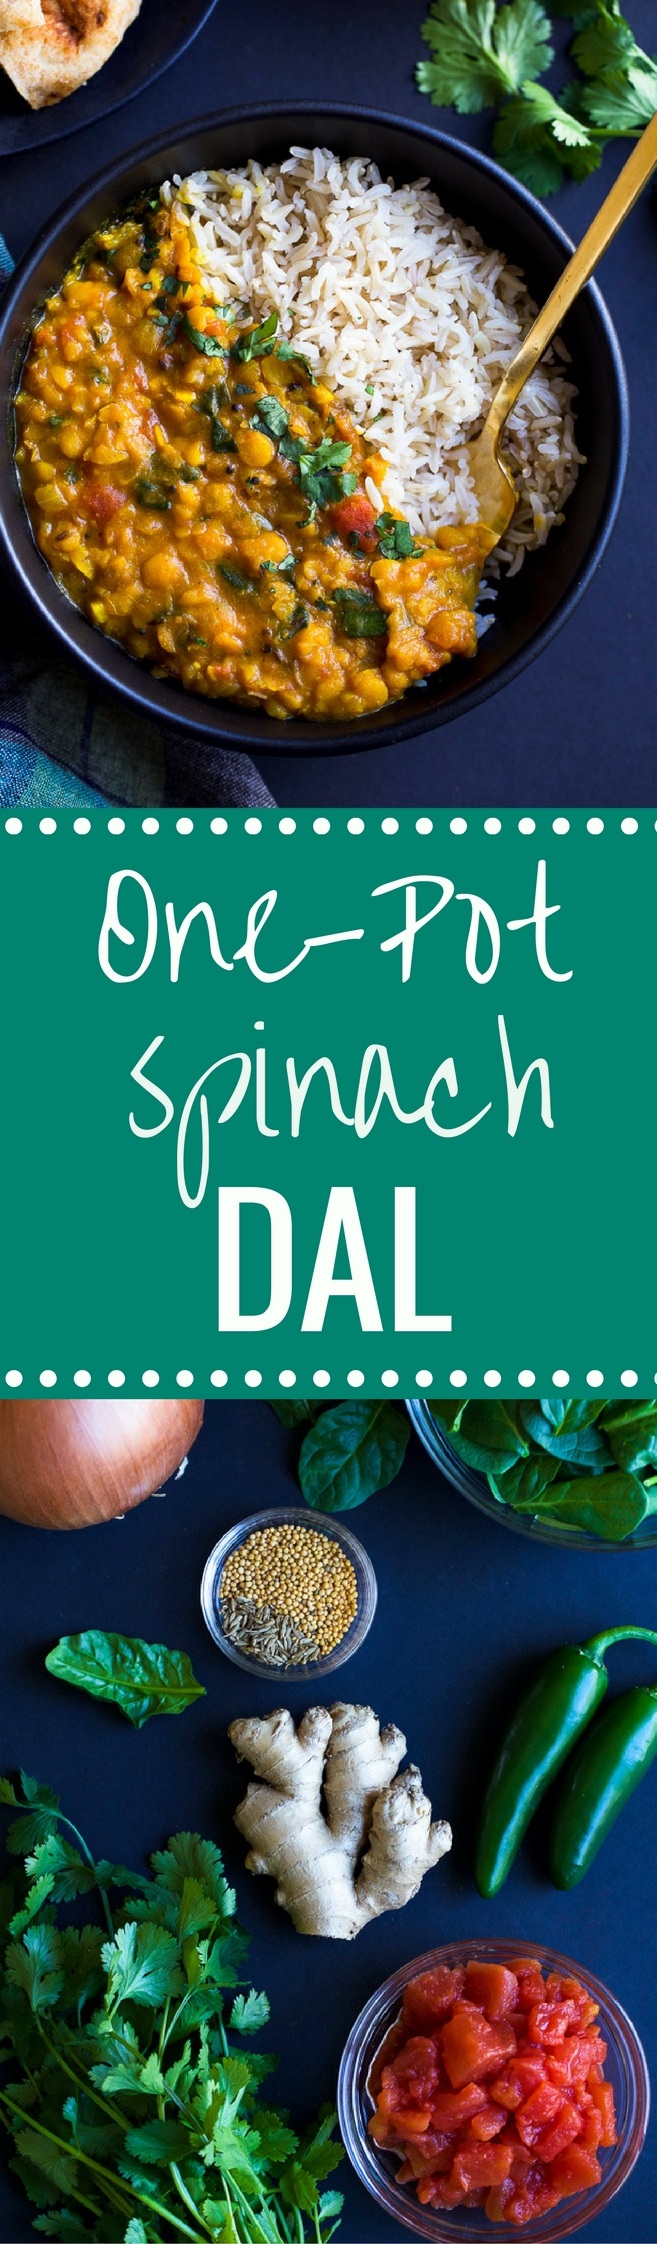 One-Pot Spinach Dal- a simple yellow dal made with warming spices, split peas and spinach. A great source of vitamin A, C, iron and plant protein! (vegan + gluten-free)